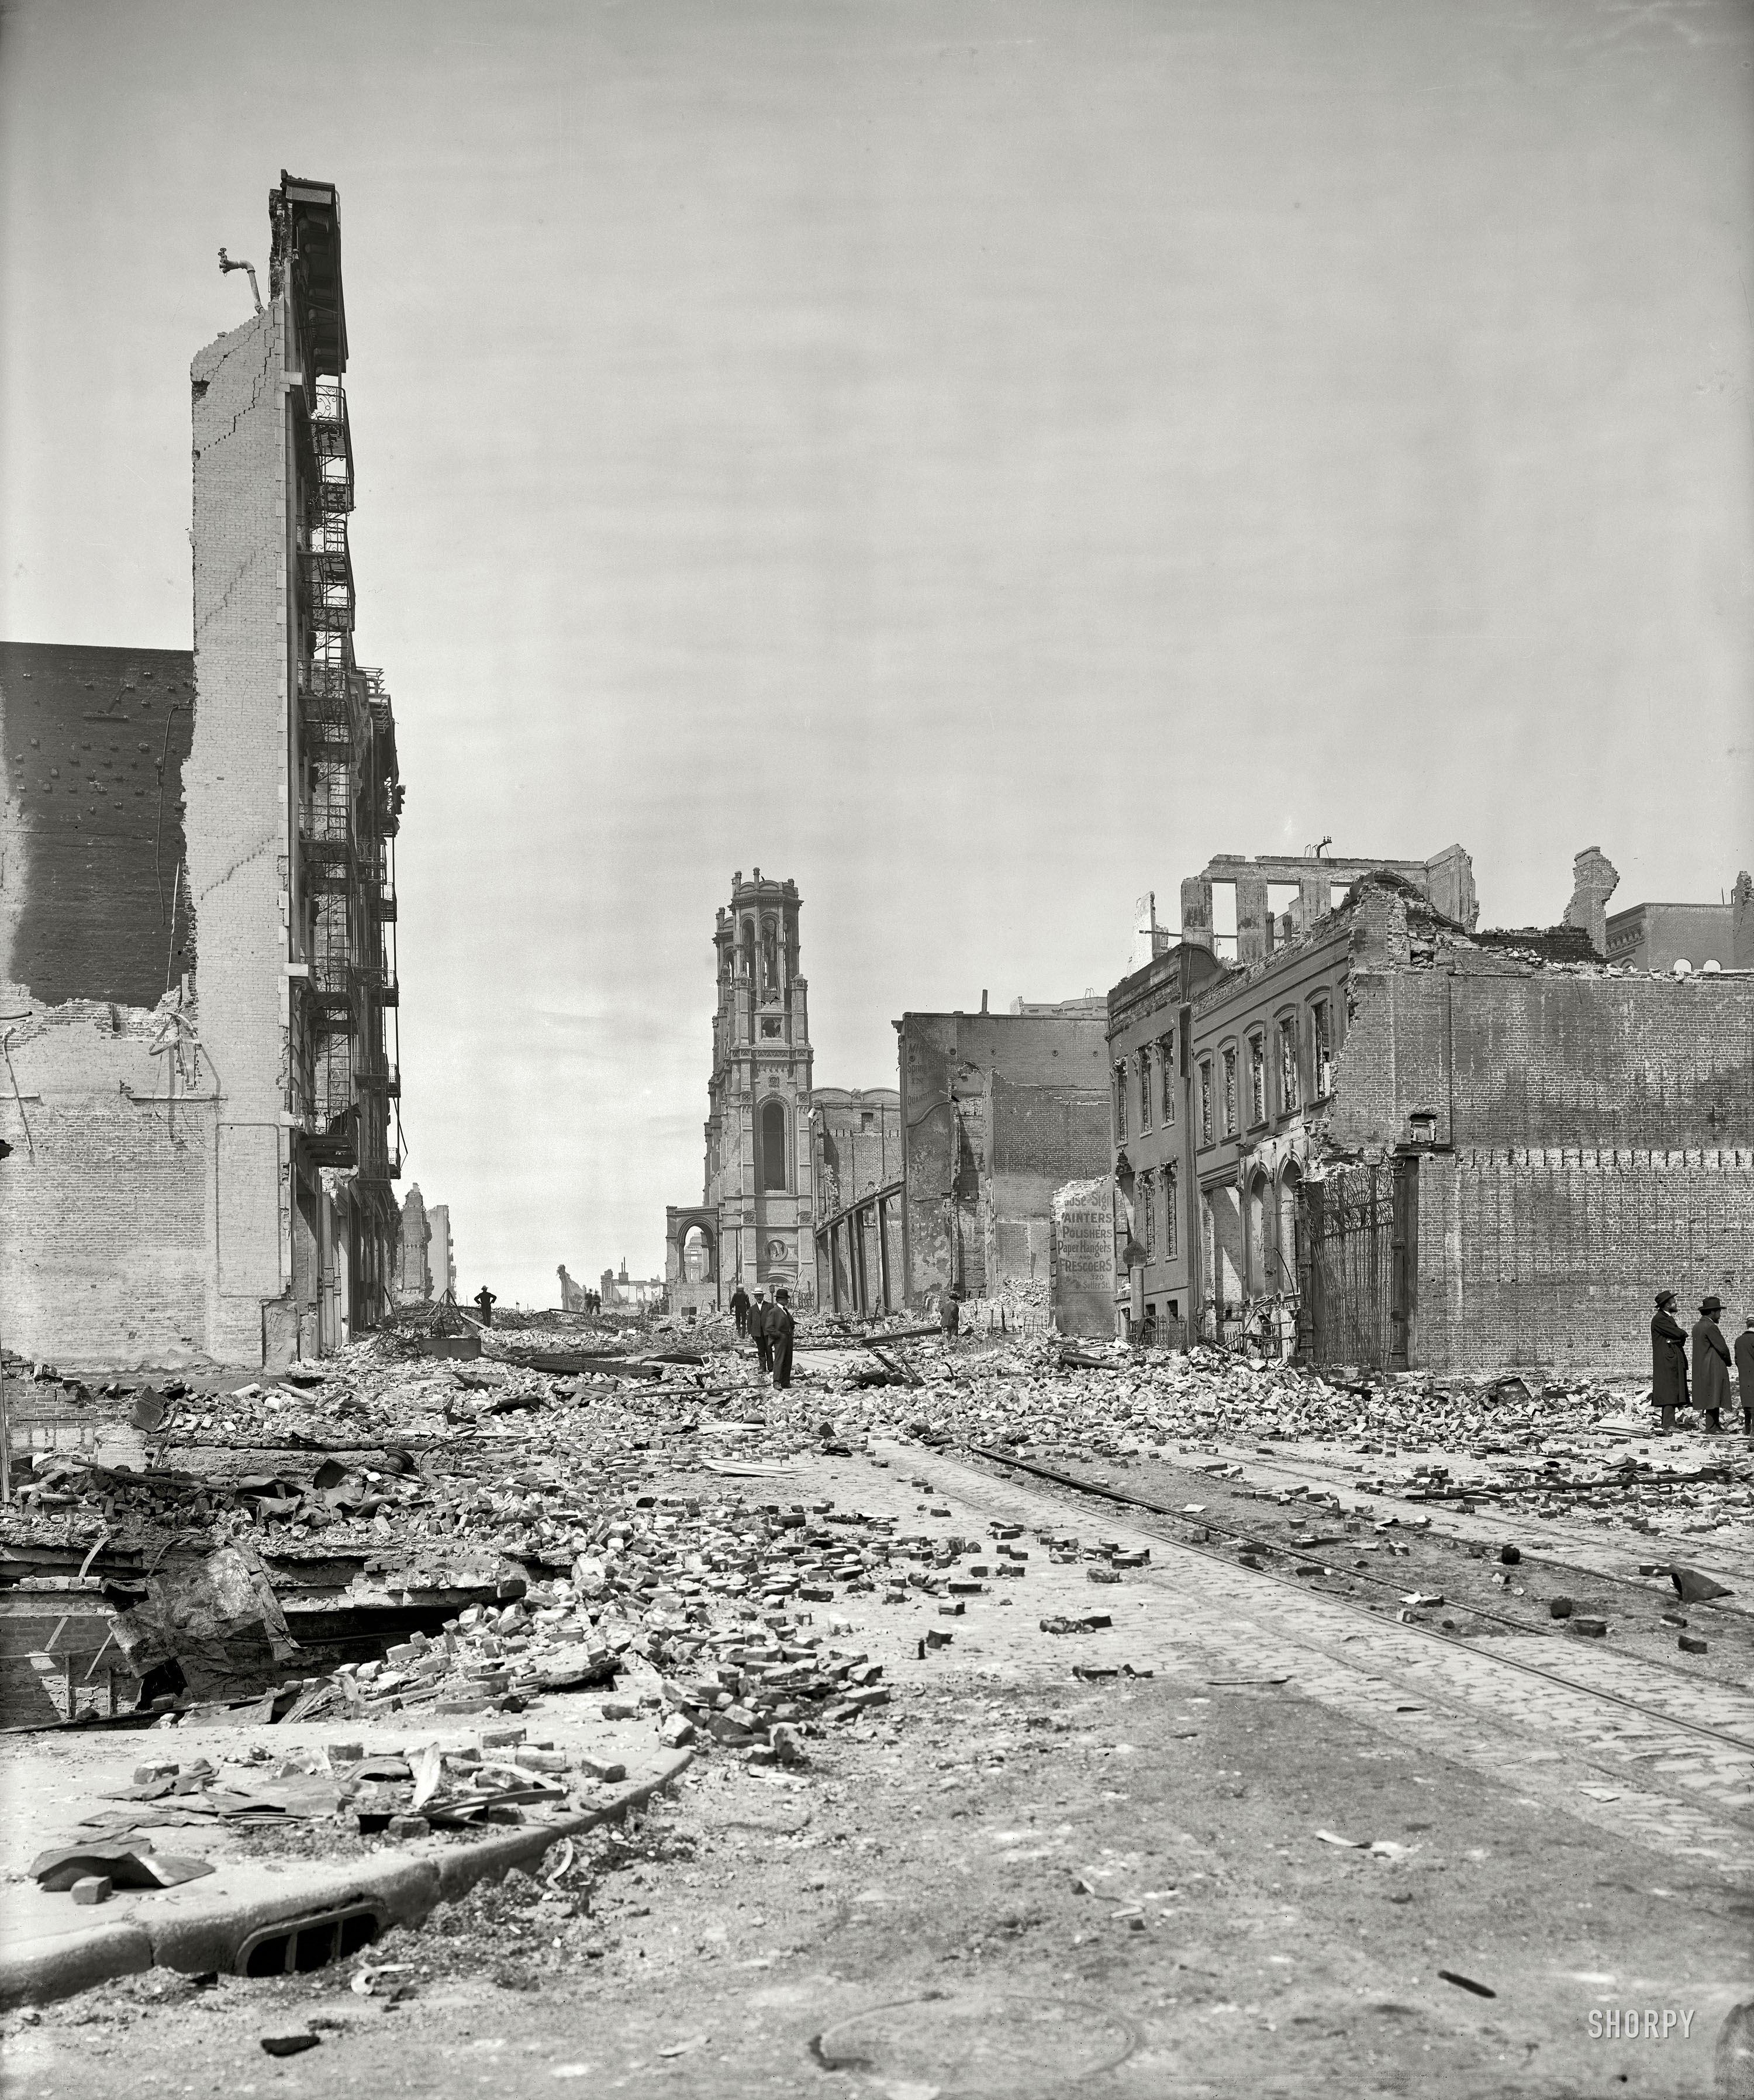 April 1906. San Francisco after the earthquake and fire. "Sutter Street up from Grant Avenue." 8x10 inch glass negative, Detroit Publishing. View full size.